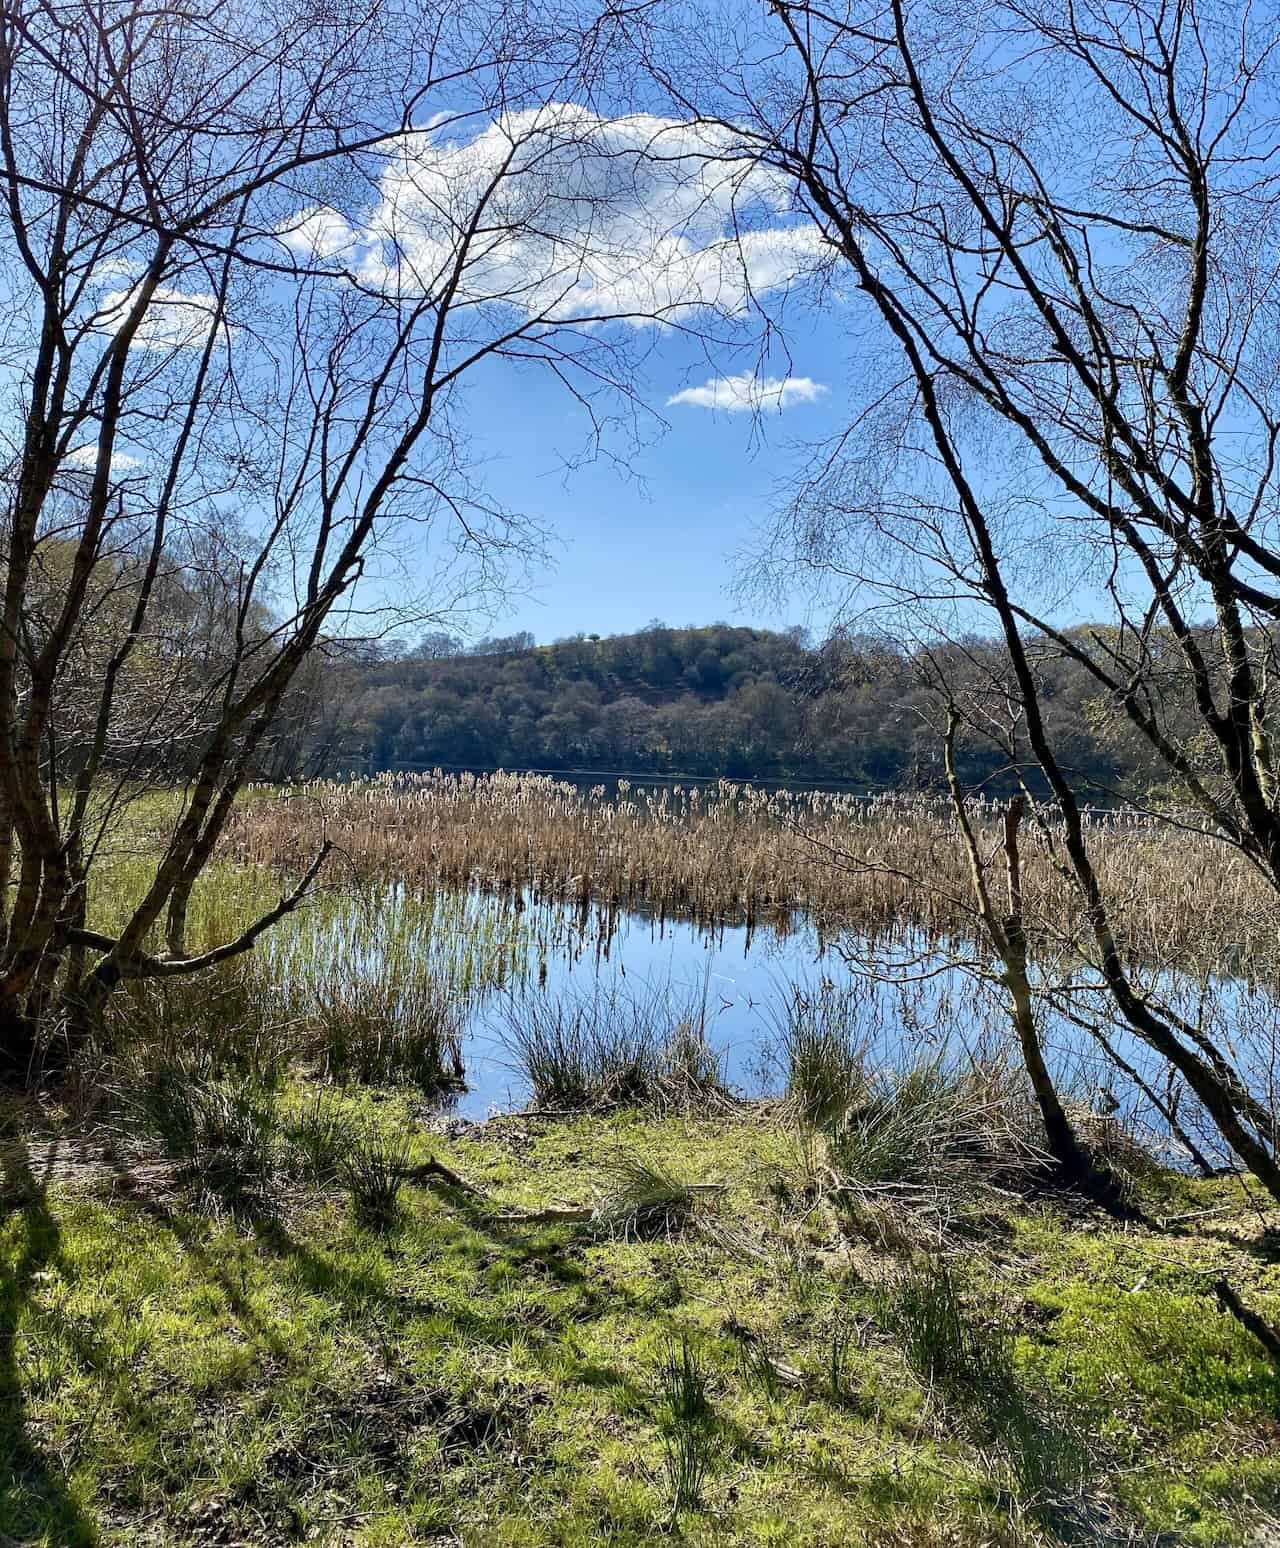 Gormire Lake, a serene natural lowland lake nestled below Whitestone Cliff on the west side of Garbutt Wood.